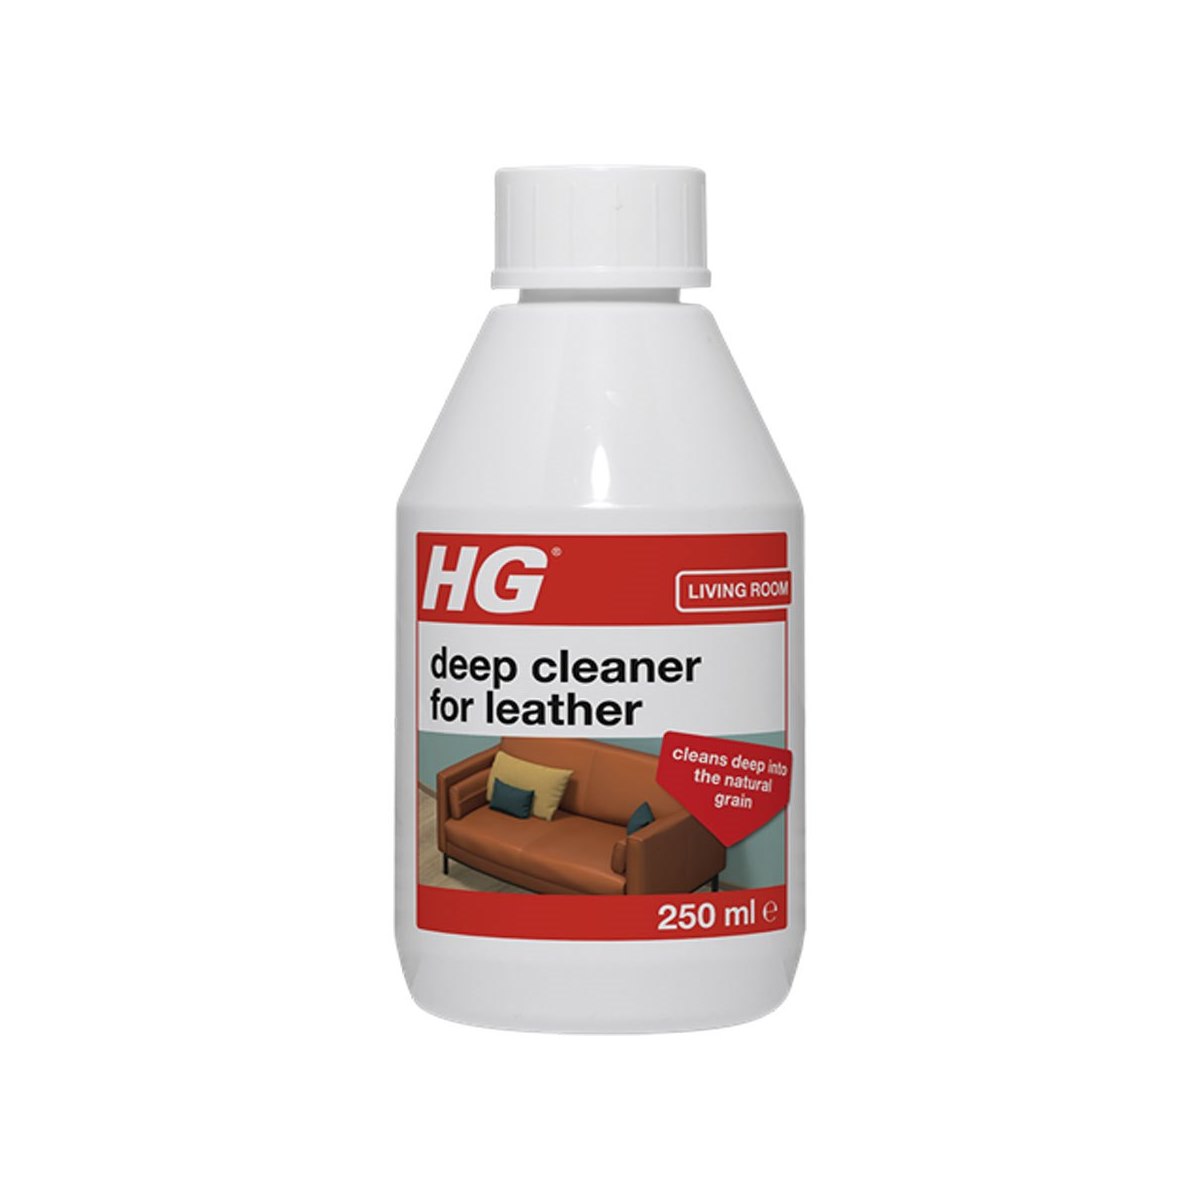 HG Deep Cleaner for Leather 250ml